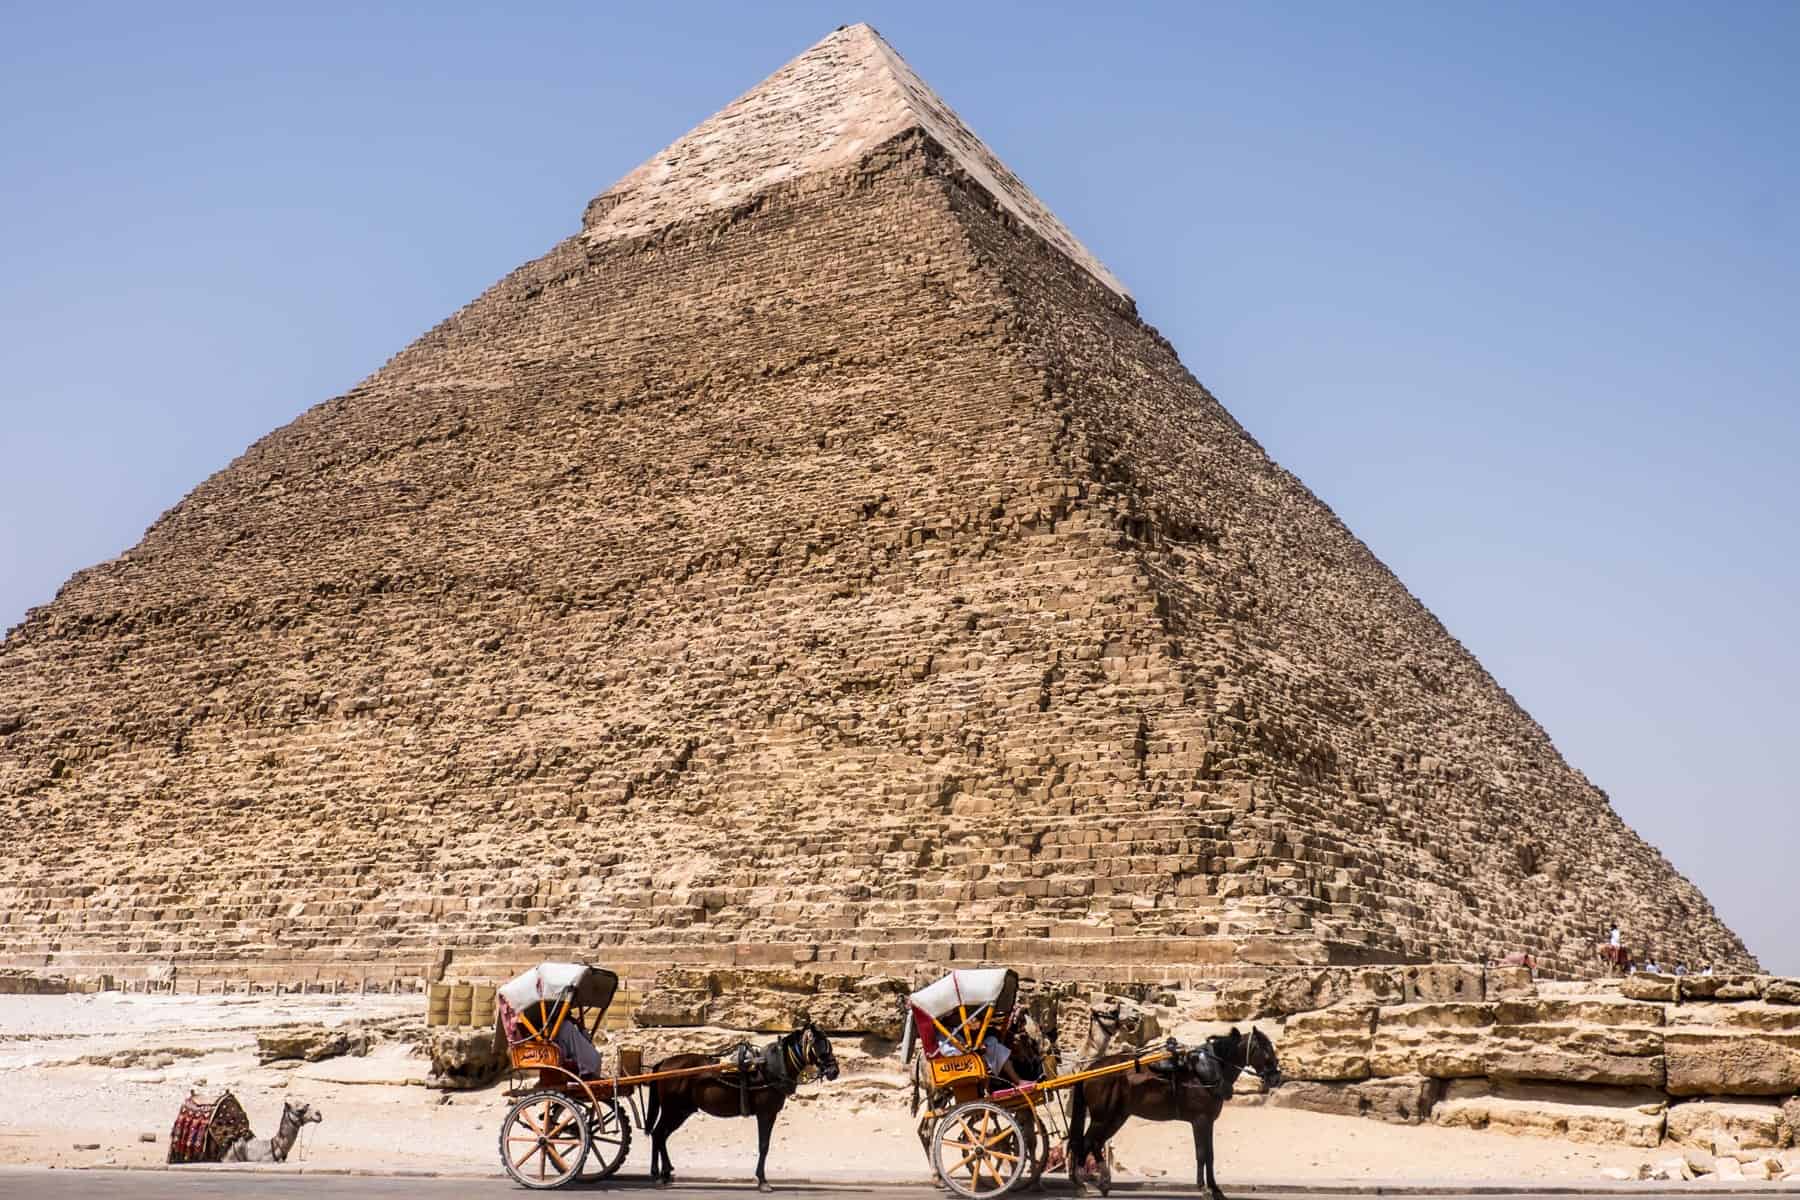 Two horses and carts stand in front of the middle Pyramid of Giza in Egypt, awaiting customers.